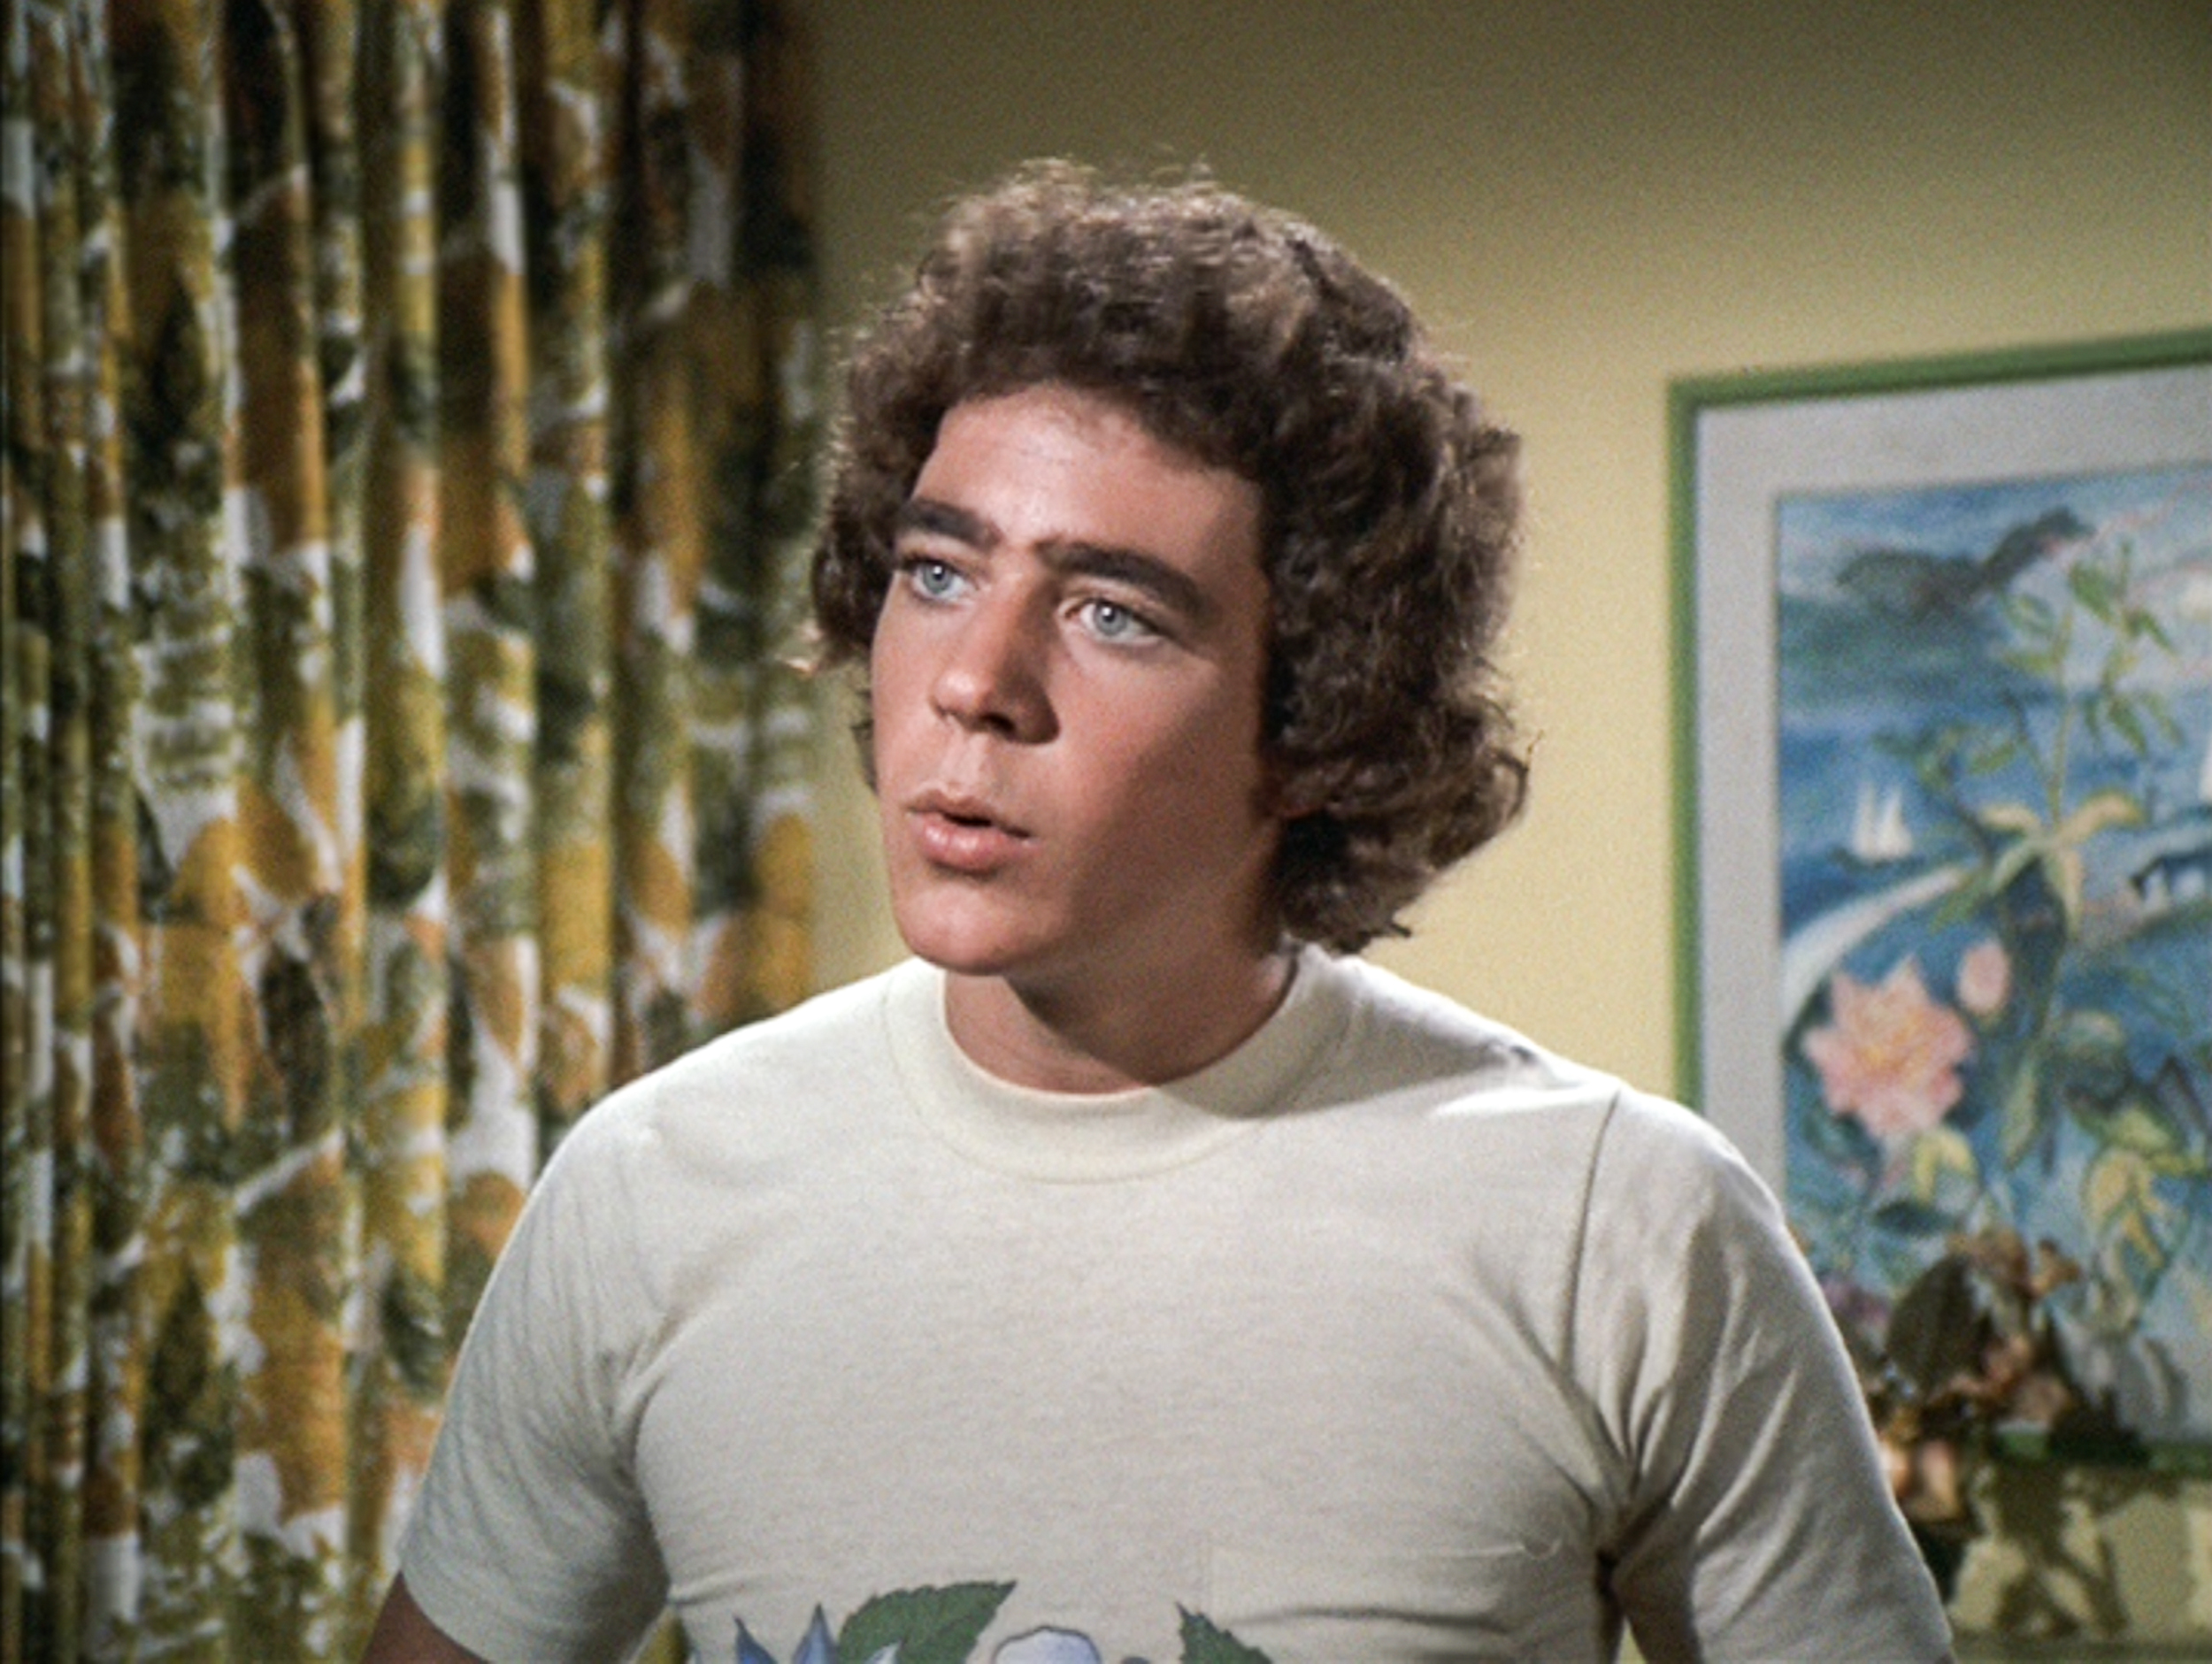 Barry Williams on the set of "The Brady Bunch" on September 29, 1972 | Source: Getty Images